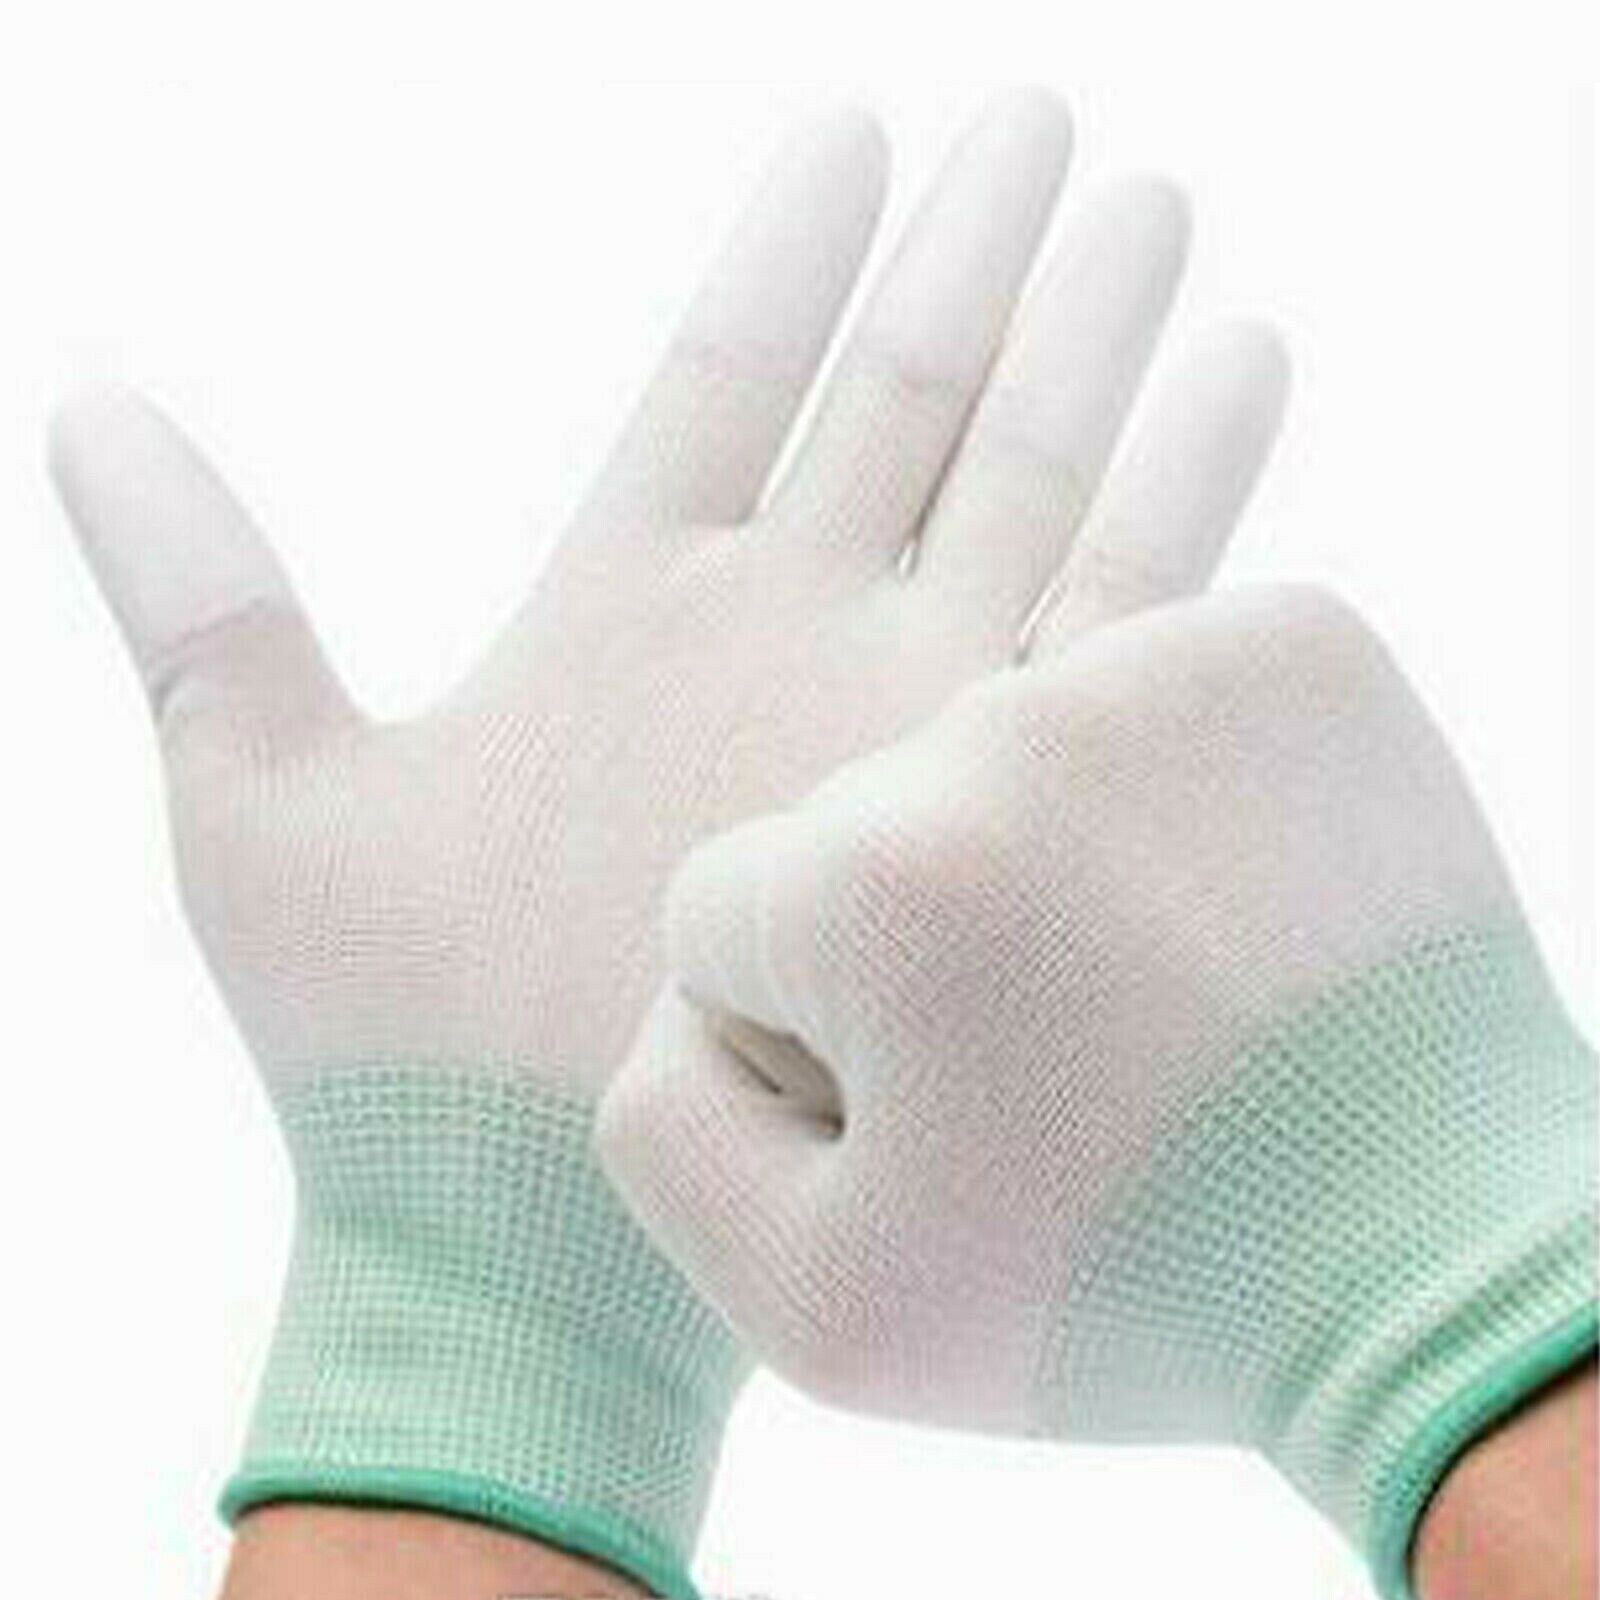 Quilting Gloves Free Motion Quilting Nylon Sewing Glove S-xl Small Medium Large